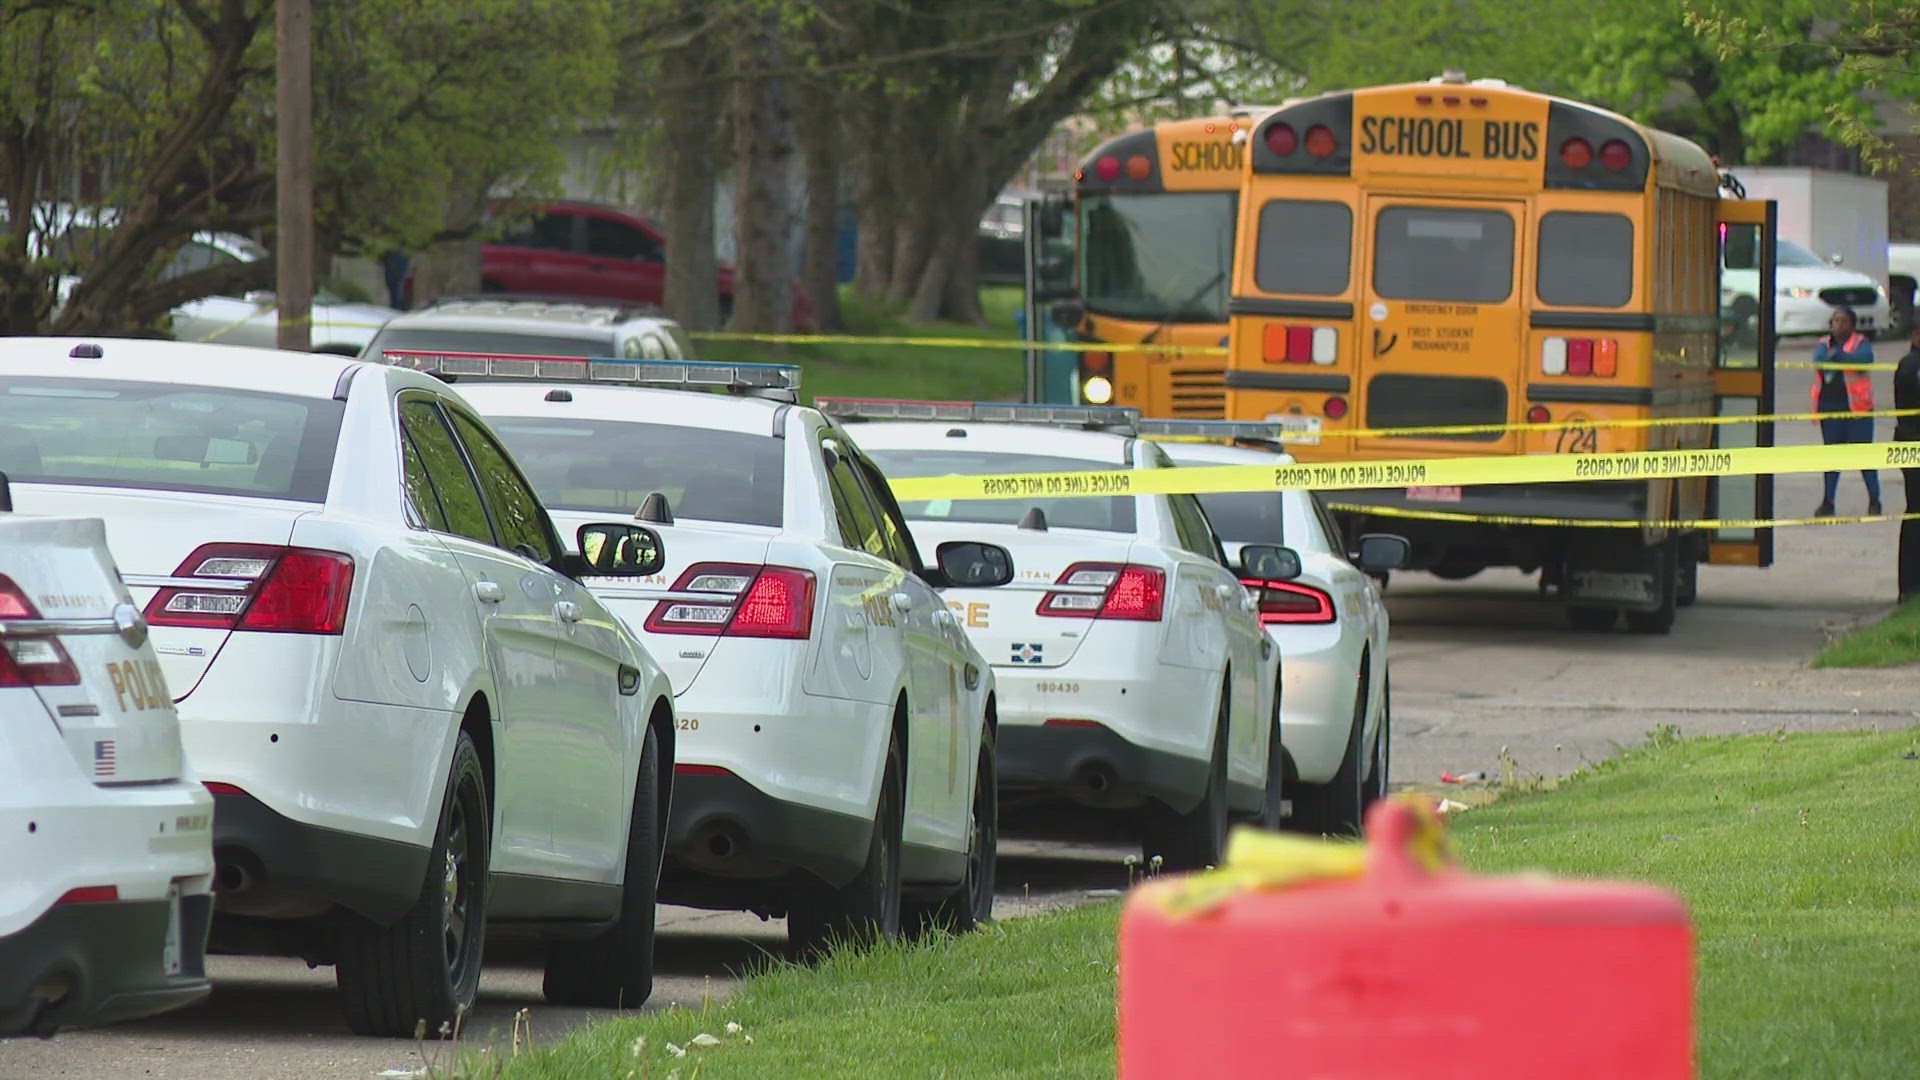 The 15-year-olds body was found lying in the grass by a bus driver before school.